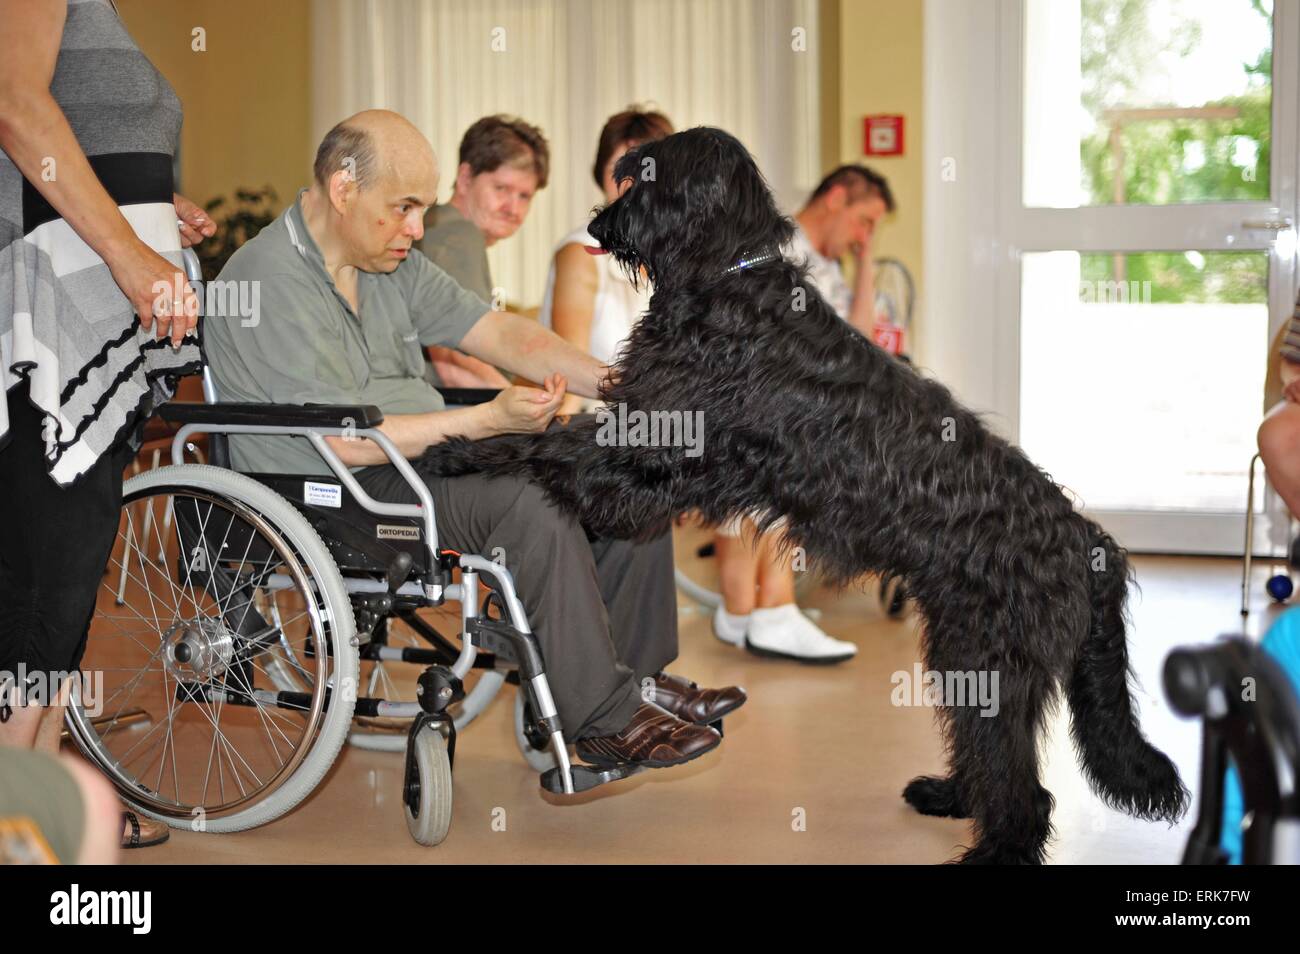 therapy dog at work Stock Photo